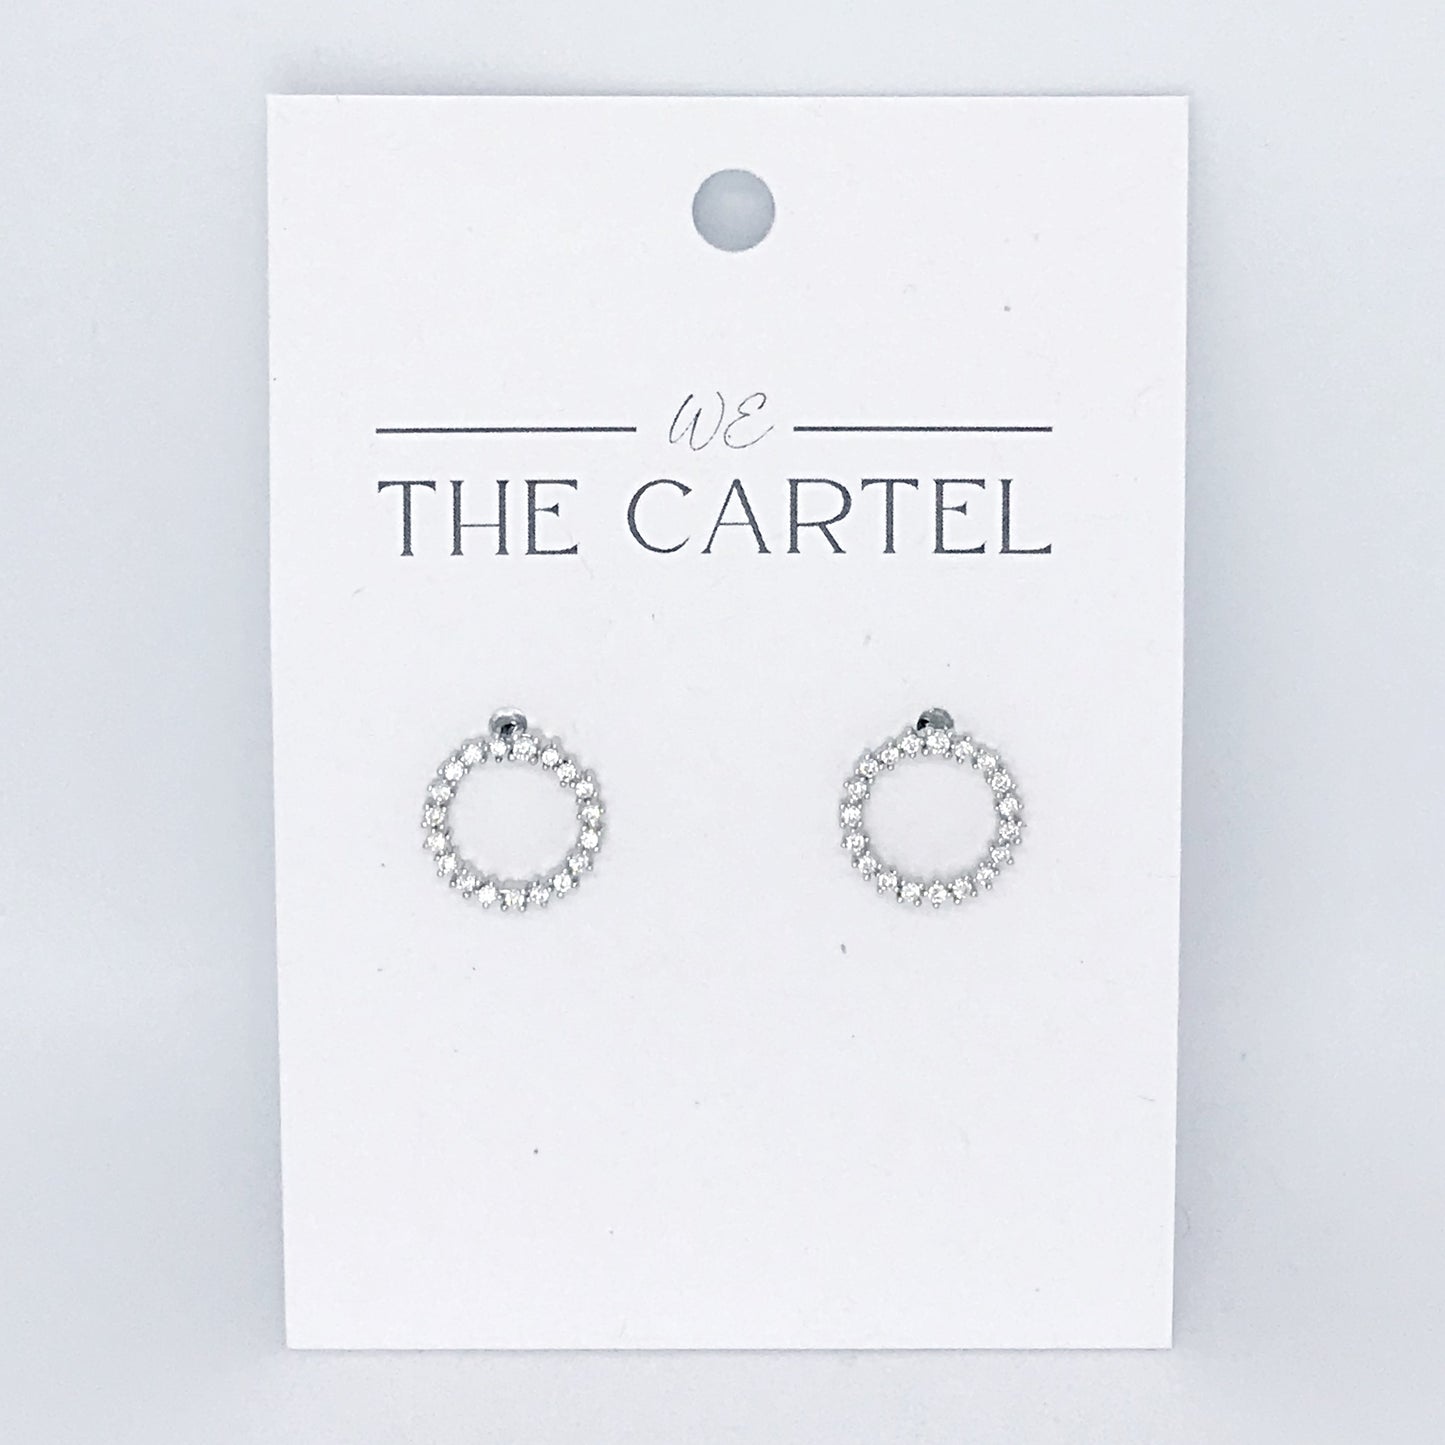 236 | EVERLY STUDS | SILVER